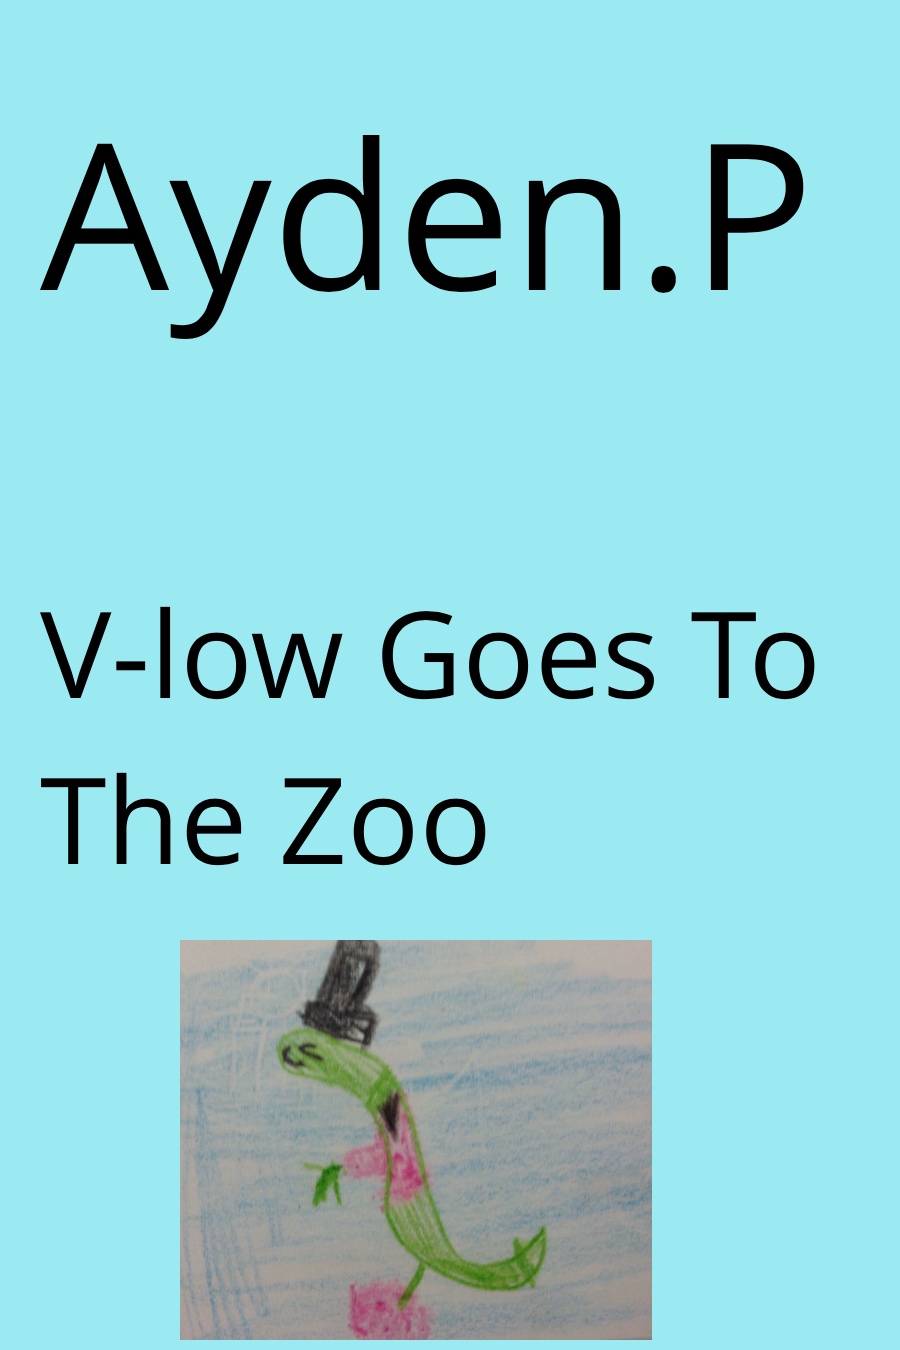 V-low goes to the Zoo by Ayden P